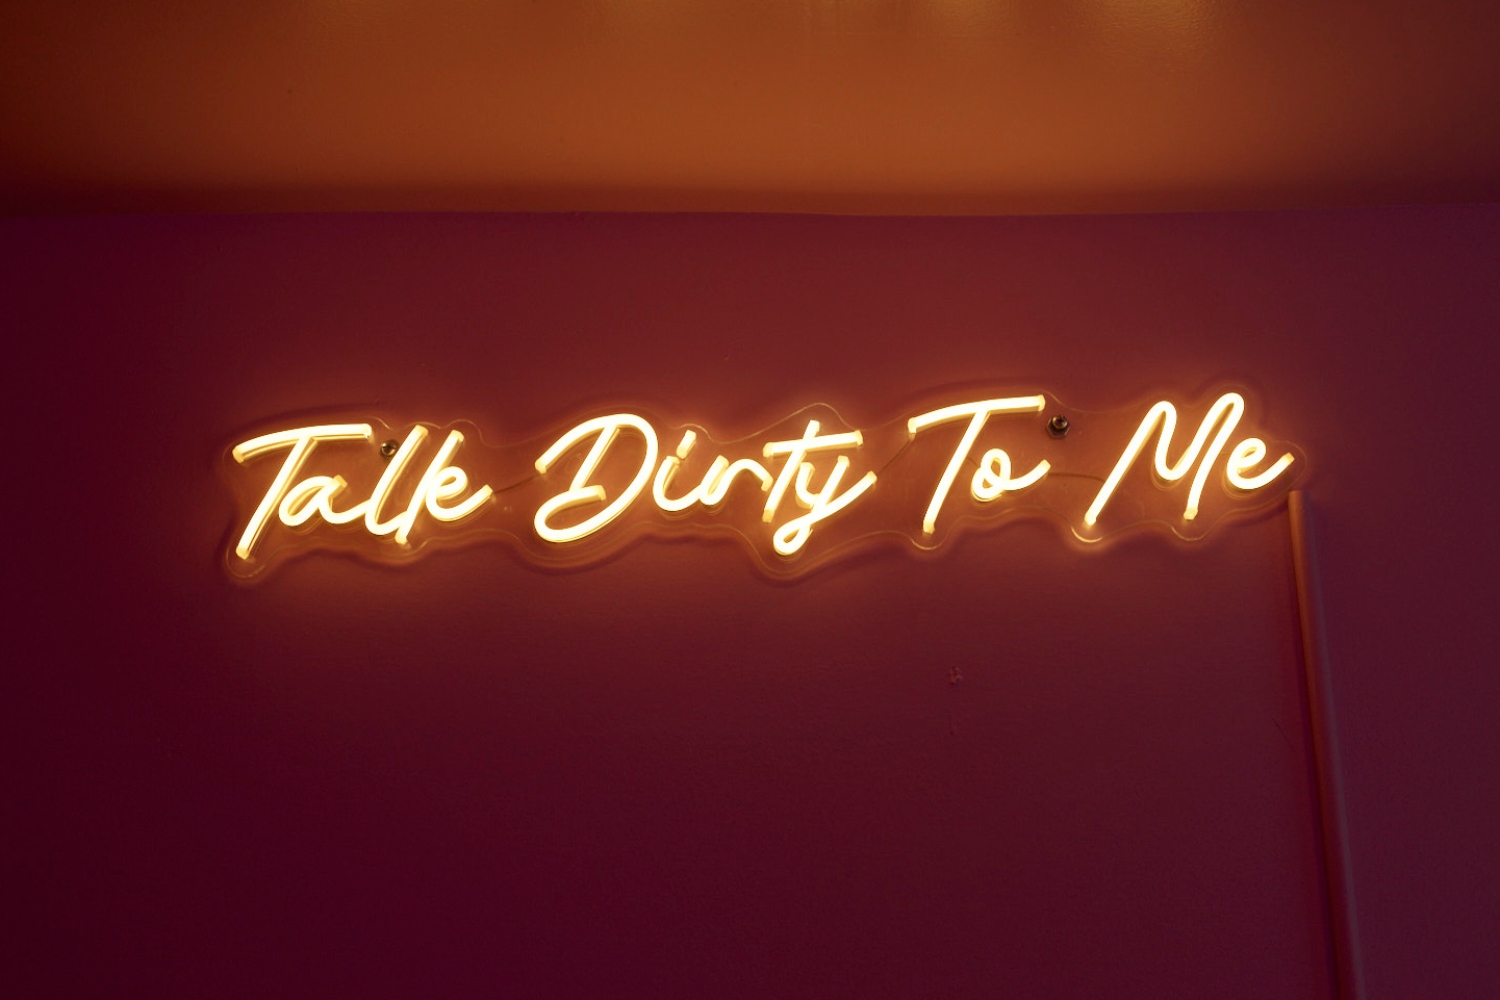 Neon wall art in Kinky's upstairs lounge reads "Talk dirty to me."